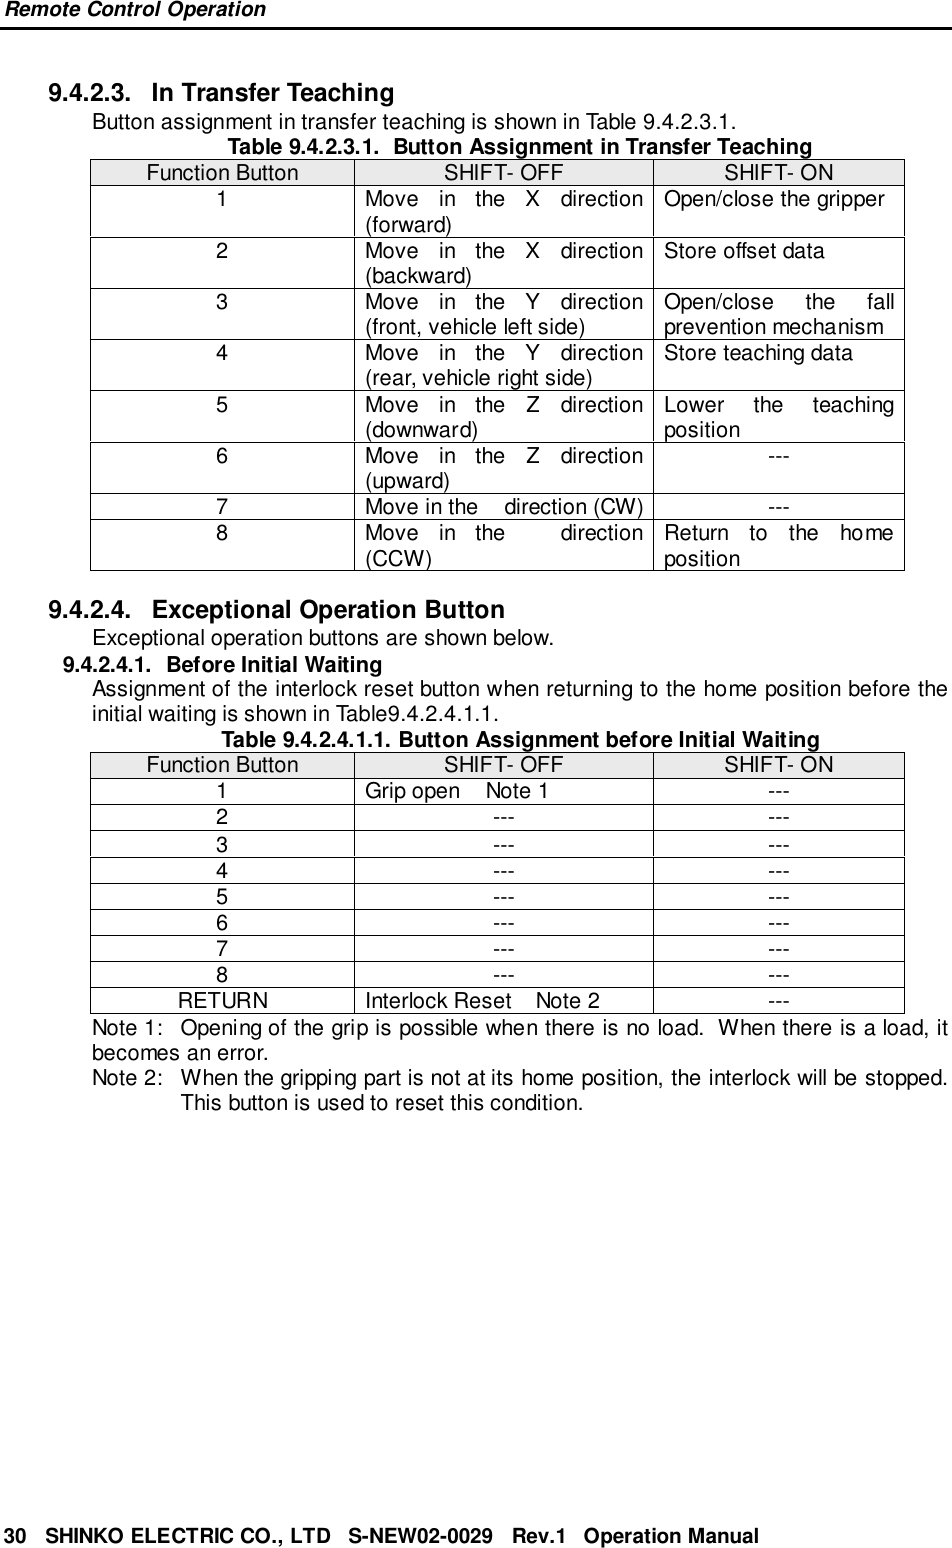 Remote Control Operation30   SHINKO ELECTRIC CO., LTD   S-NEW02-0029   Rev.1   Operation Manual9.4.2.3.  In Transfer TeachingButton assignment in transfer teaching is shown in Table 9.4.2.3.1.Table 9.4.2.3.1.  Button Assignment in Transfer TeachingFunction Button SHIFT- OFF SHIFT- ON1 Move in the X direction(forward) Open/close the gripper2 Move in the X direction(backward) Store offset data3 Move in the Y direction(front, vehicle left side) Open/close the fallprevention mechanism4 Move in the Y direction(rear, vehicle right side) Store teaching data5 Move in the Z direction(downward) Lower the teachingposition6 Move in the Z direction(upward) ---7 Move in the  direction (CW) ---8 Move in the   direction(CCW) Return to the homeposition9.4.2.4.  Exceptional Operation ButtonExceptional operation buttons are shown below.9.4.2.4.1. Before Initial WaitingAssignment of the interlock reset button when returning to the home position before theinitial waiting is shown in Table9.4.2.4.1.1.Table 9.4.2.4.1.1. Button Assignment before Initial WaitingFunction Button SHIFT- OFF SHIFT- ON1 Grip open    Note 1 ---2 --- ---3 --- ---4 --- ---5 --- ---6 --- ---7 --- ---8 --- ---RETURN Interlock Reset    Note 2 ---Note 1: Opening of the grip is possible when there is no load.  When there is a load, itbecomes an error.Note 2: When the gripping part is not at its home position, the interlock will be stopped.This button is used to reset this condition.